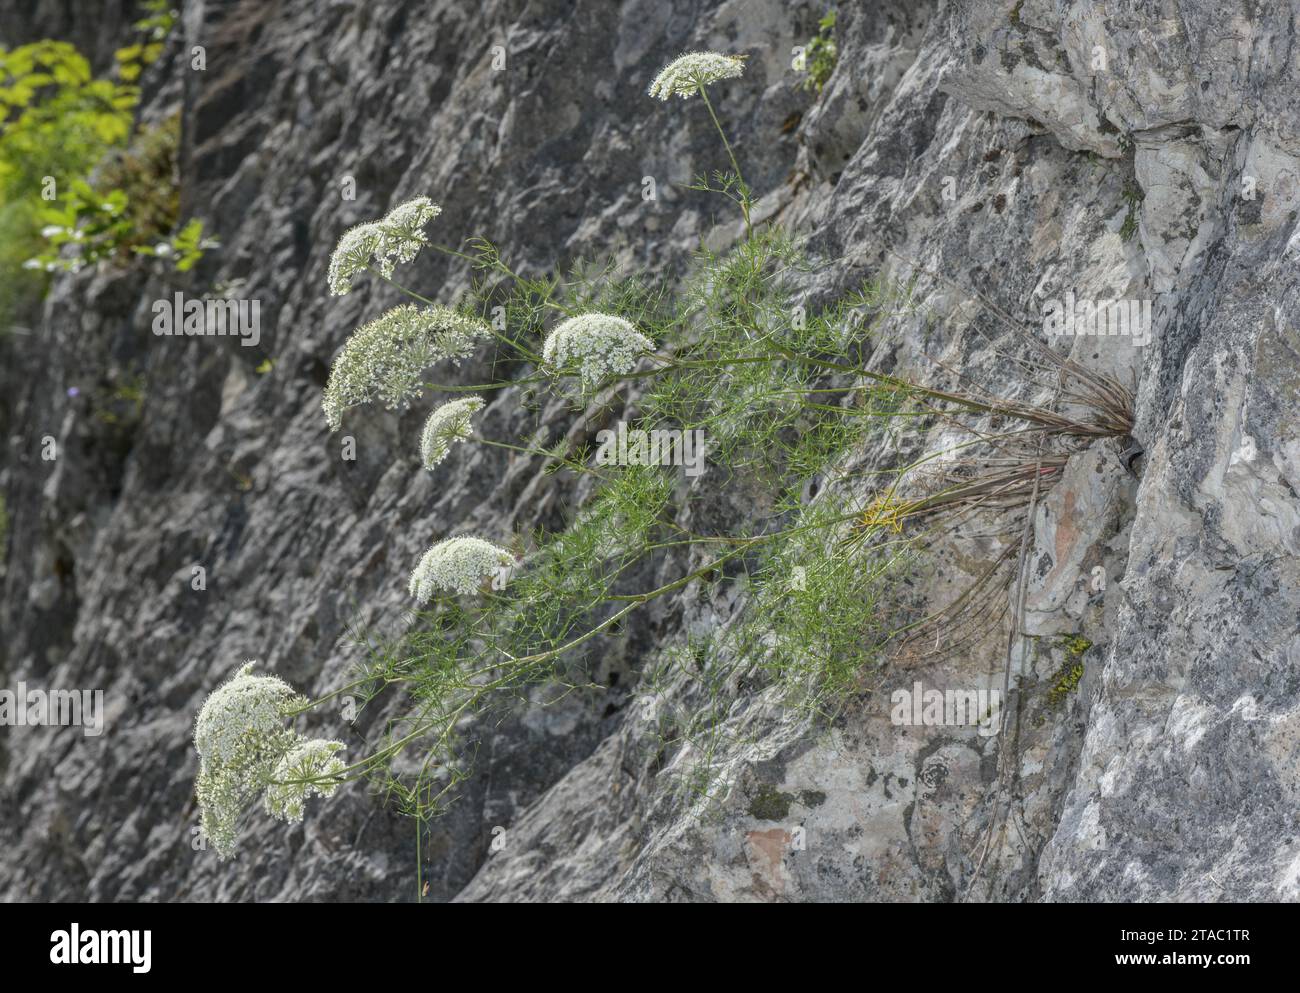 An umbellifer, Athamanta turbith, in flower on limestone cliff in the Julian Alps. Slovenia. Stock Photo